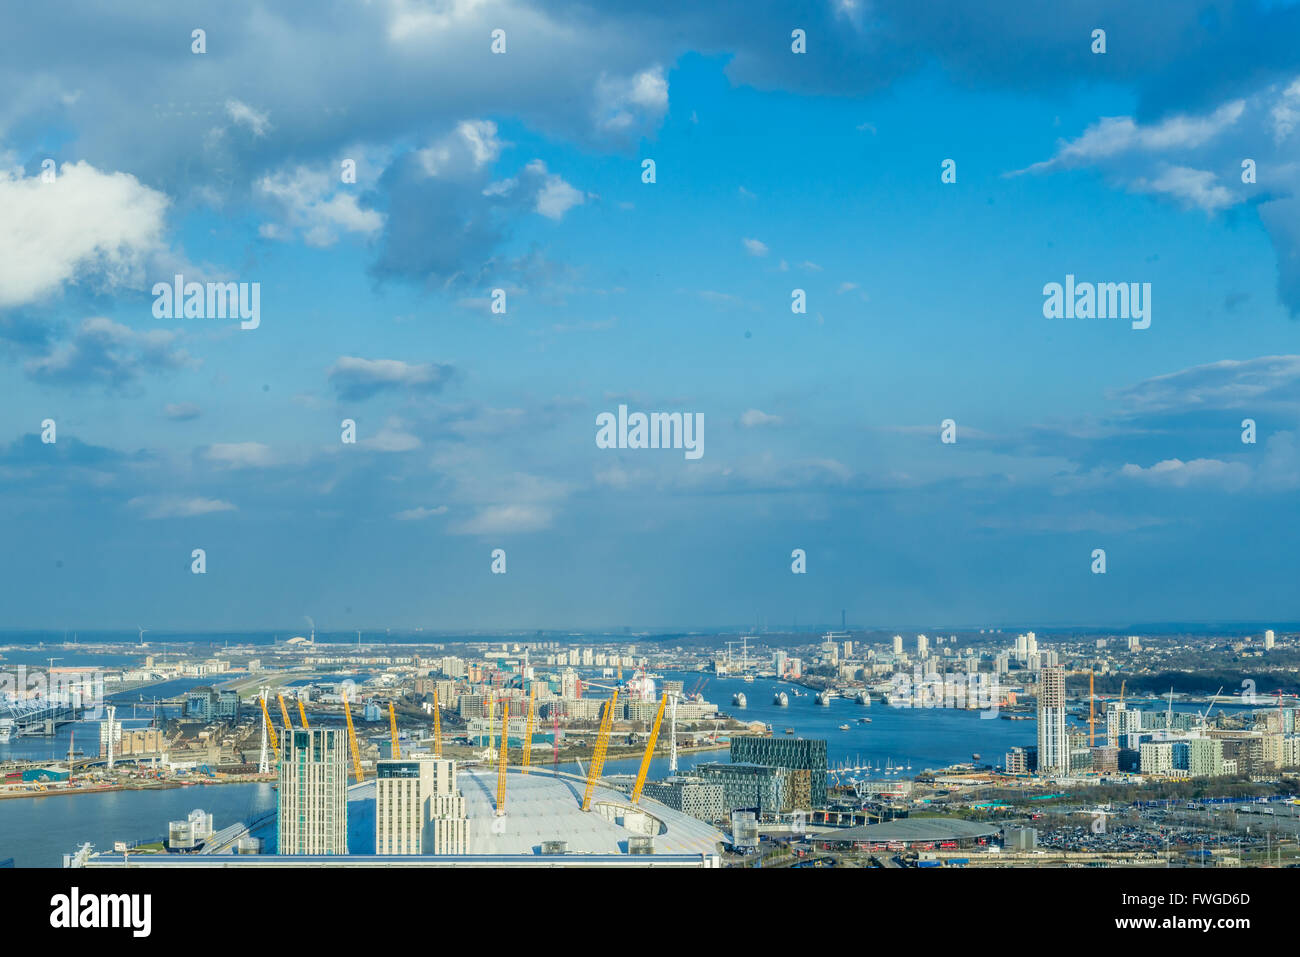 London, United Kingdom - March 31, 2016: View at London O2 Arena, North Greenwich, Thames Barriers, various residential building Stock Photo